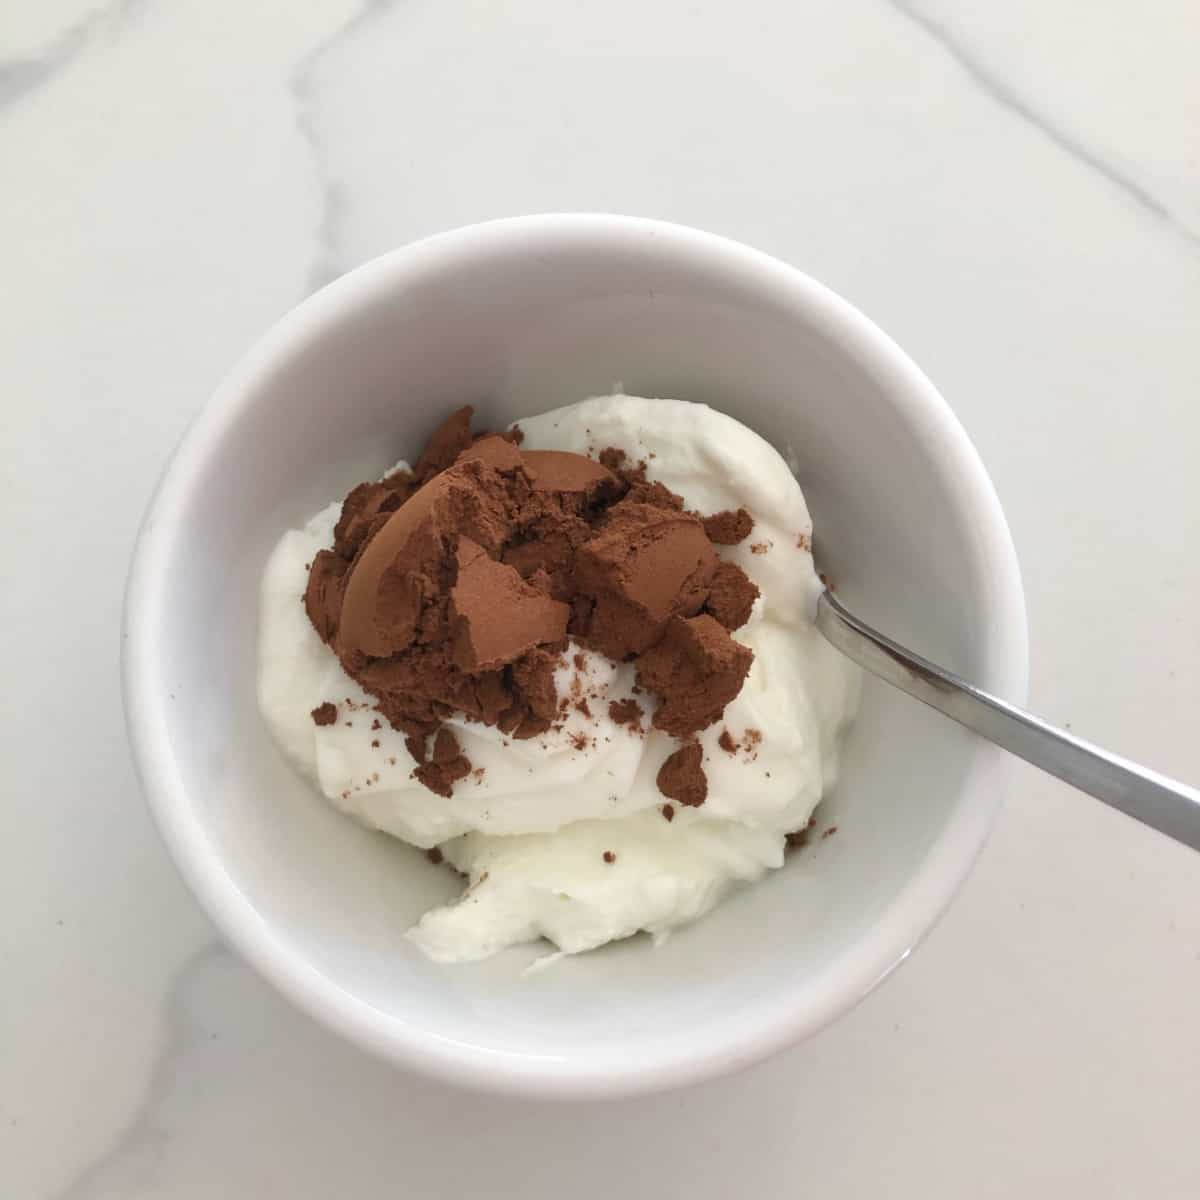 Nonfat Greek yogurt with cocoa powder in small white bowl with spoon.